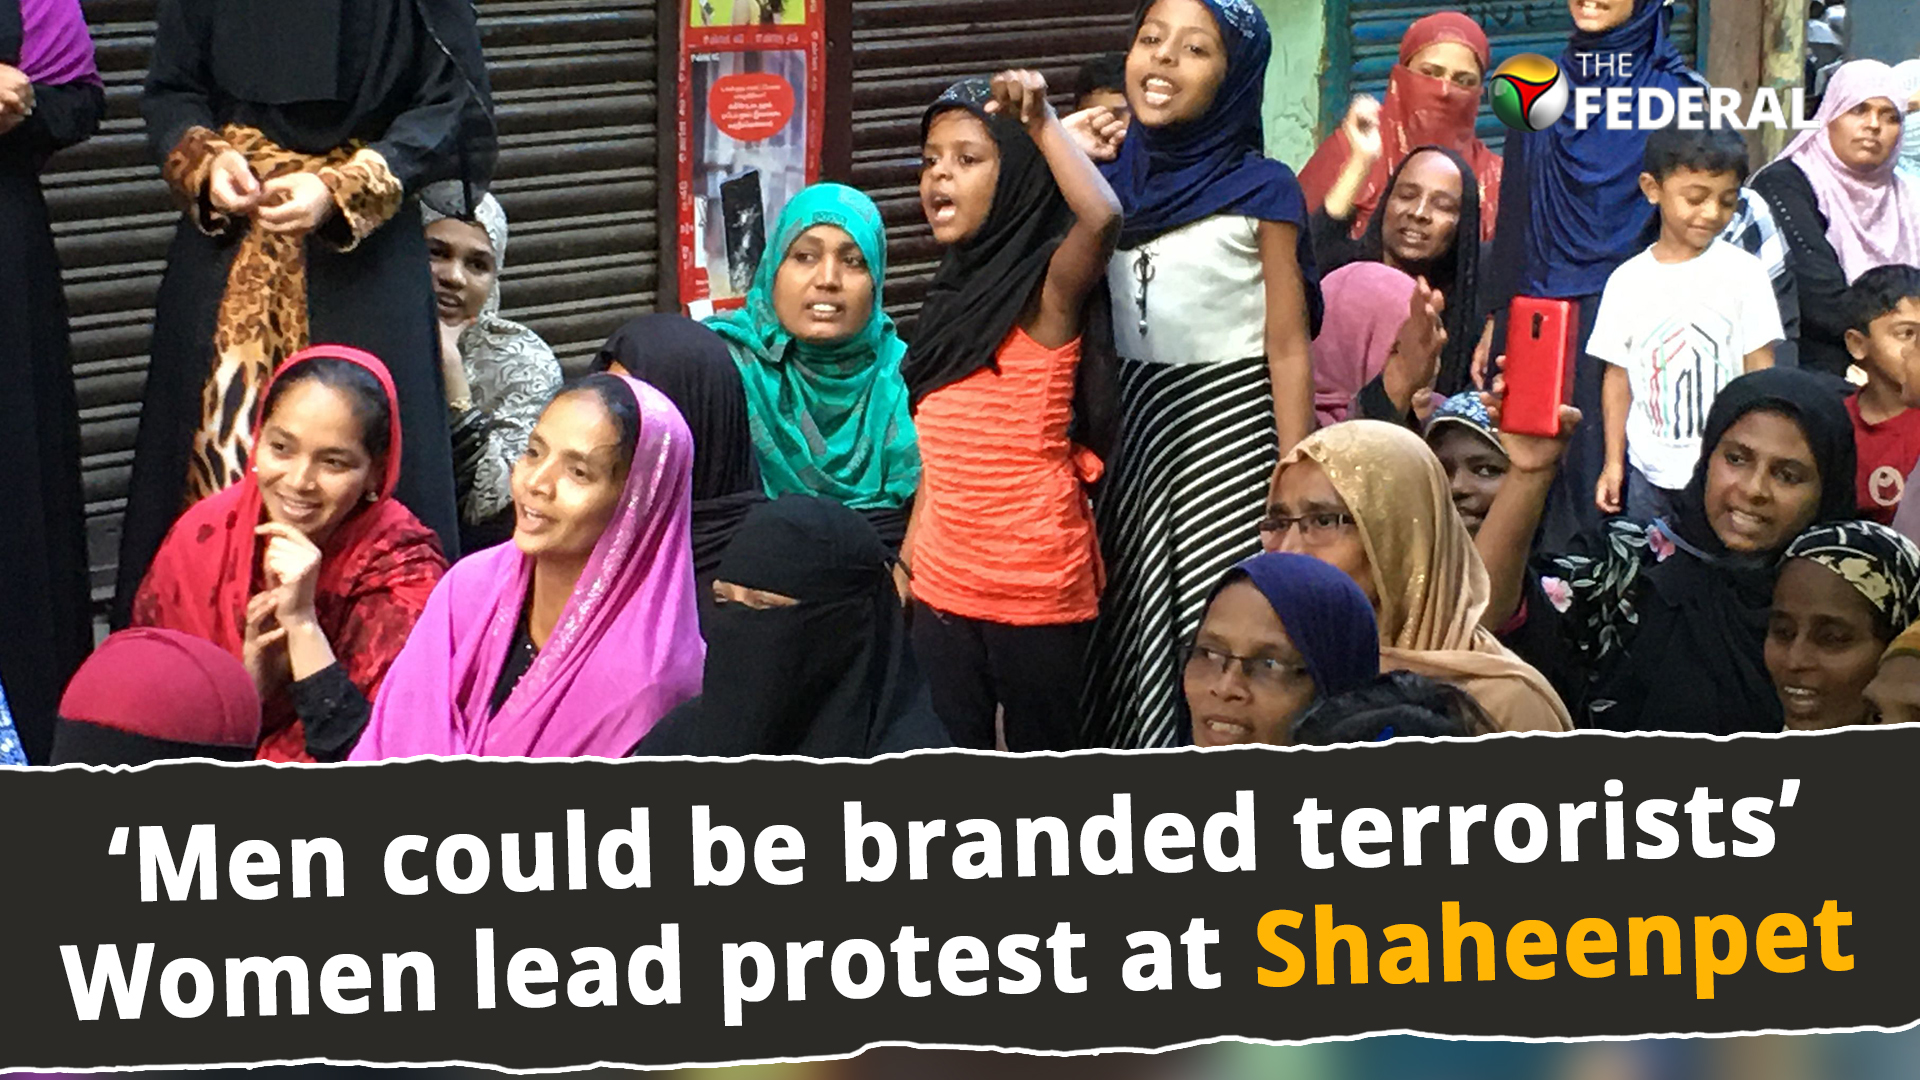 Men could be branded terrorists, says Shaheenpet woman protester